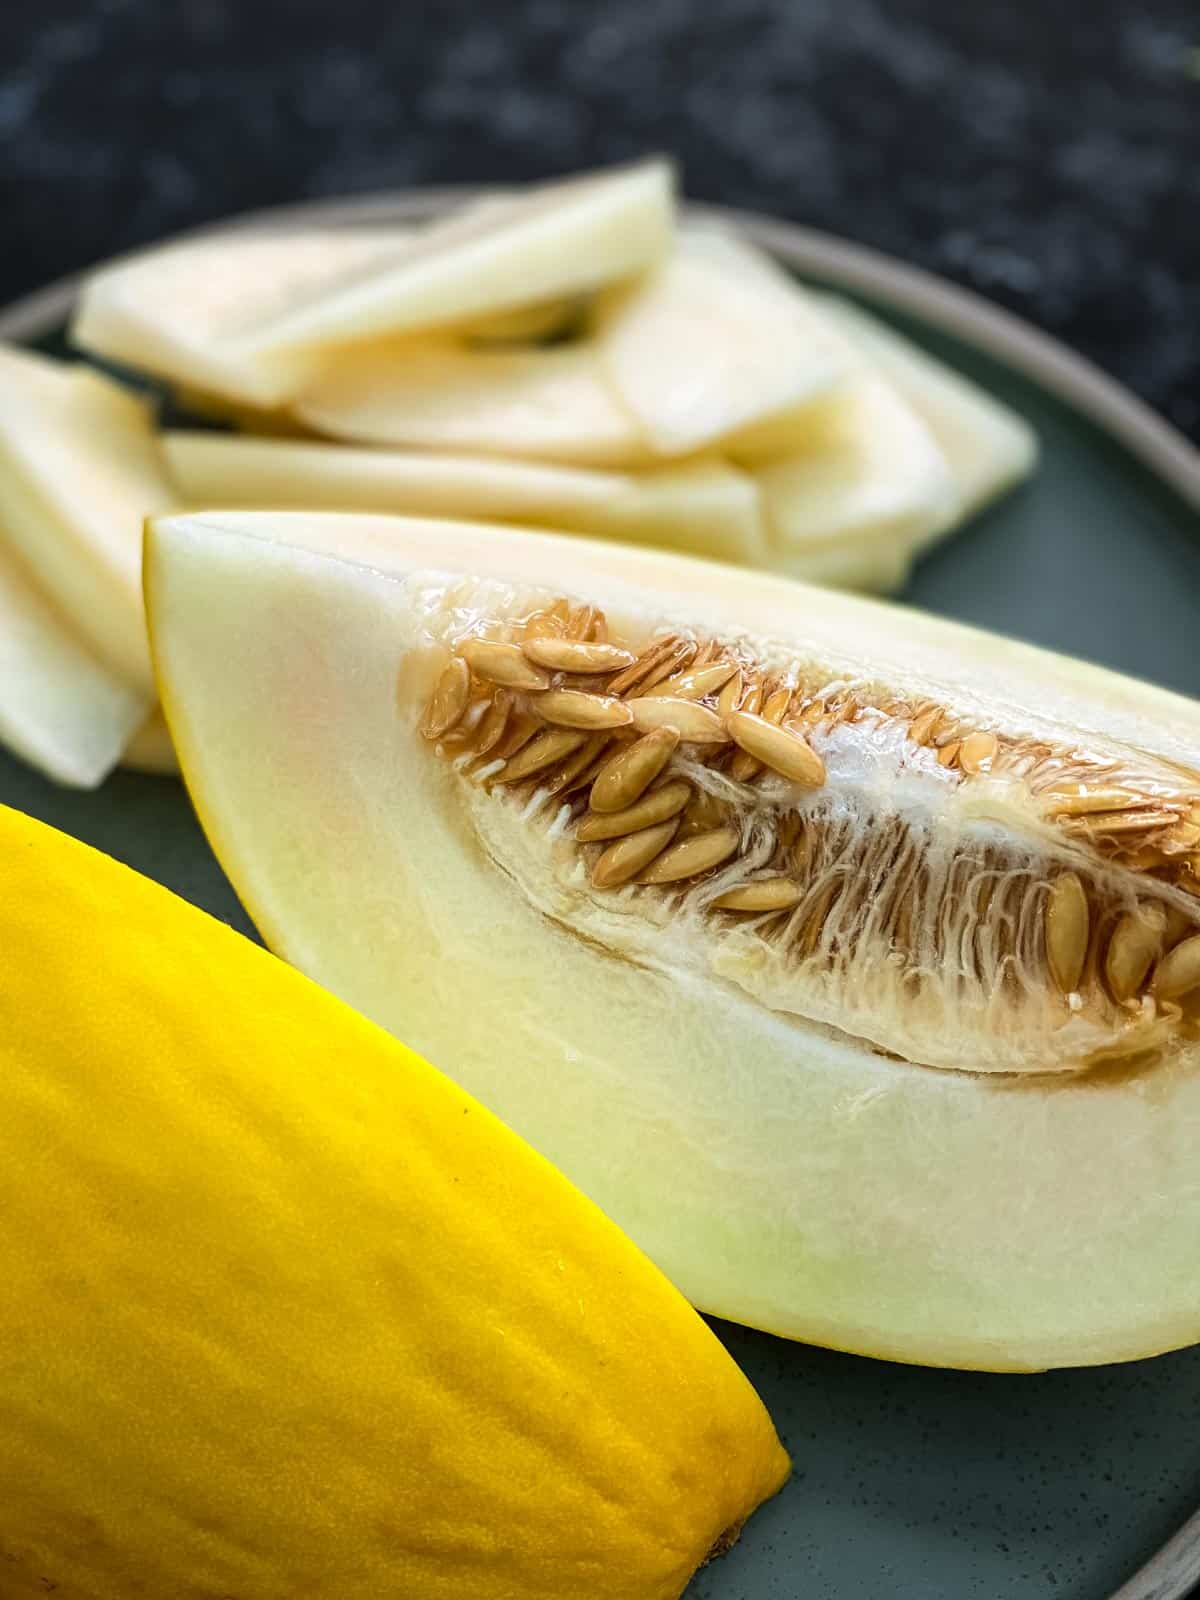 Wedge of canary melon with seeds